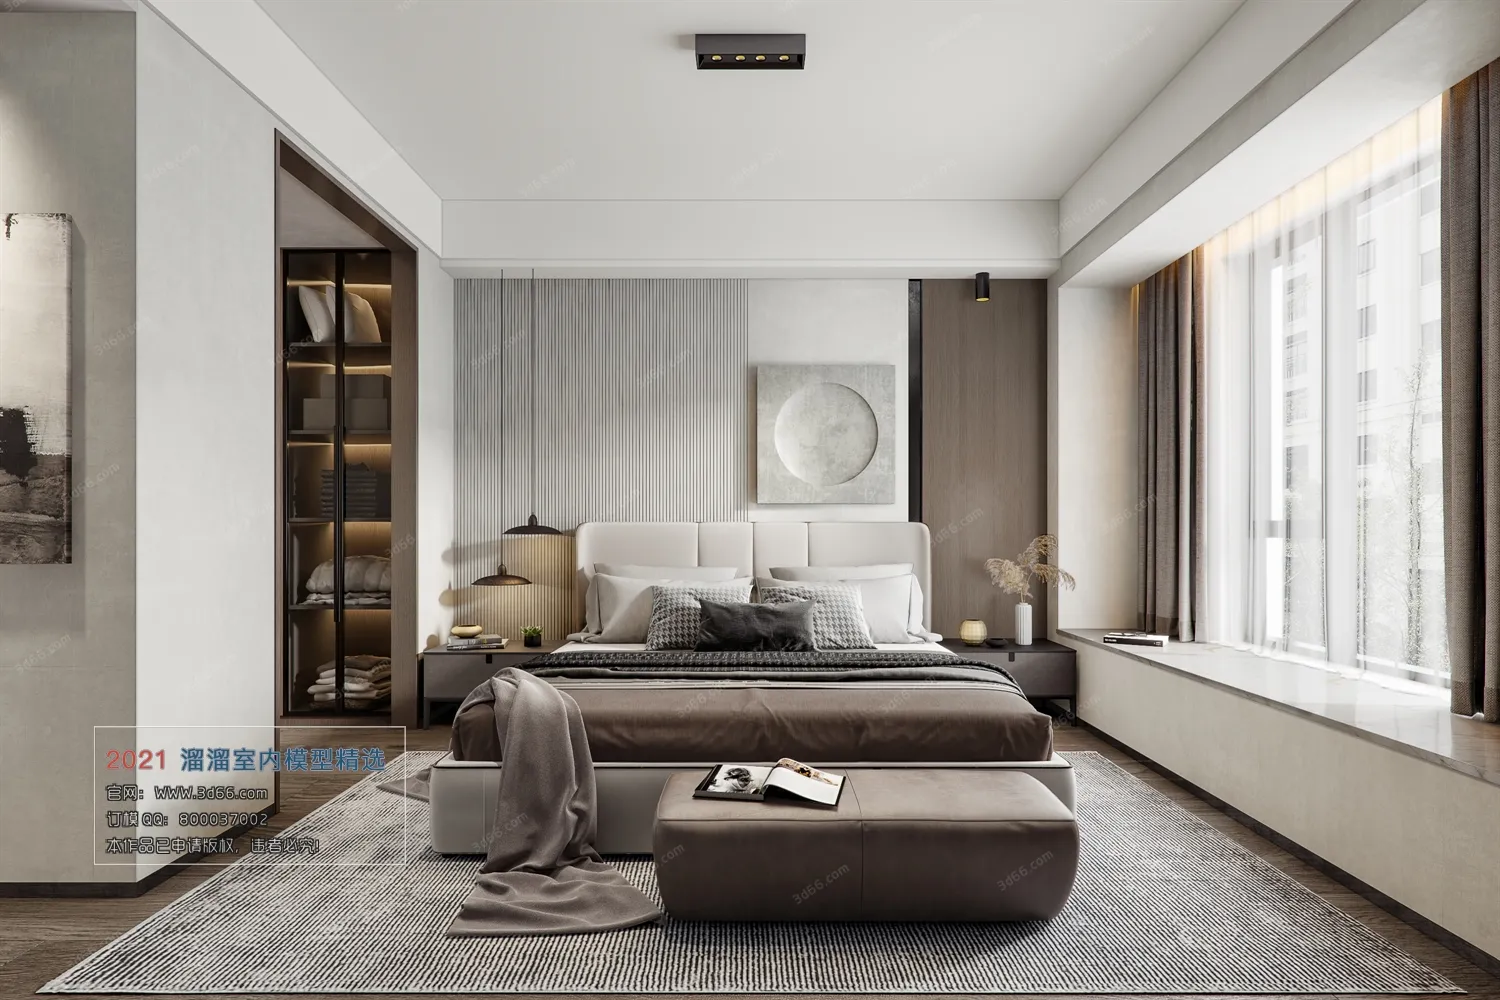 BEDROOM – A014-Modern style-Vray model